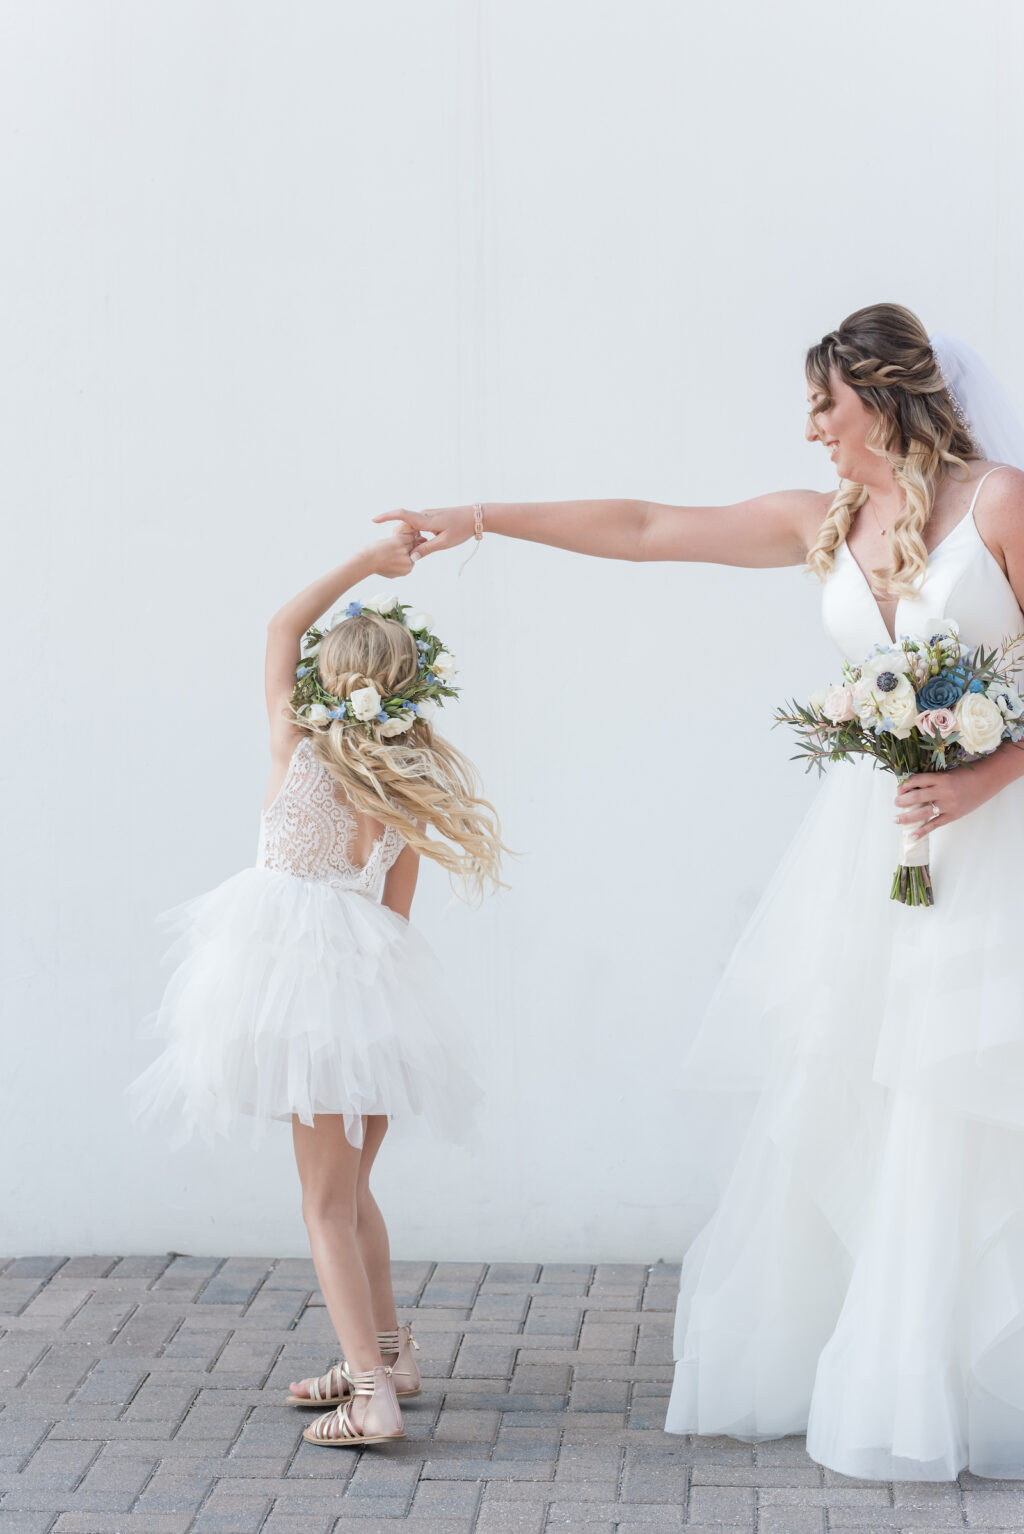 Bride in Tulle Ballgown Wedding Dress with Flower Girl in Flower Crown Portrait | Ashley Renee Bridal | Adore Bridal Hair and Makeup